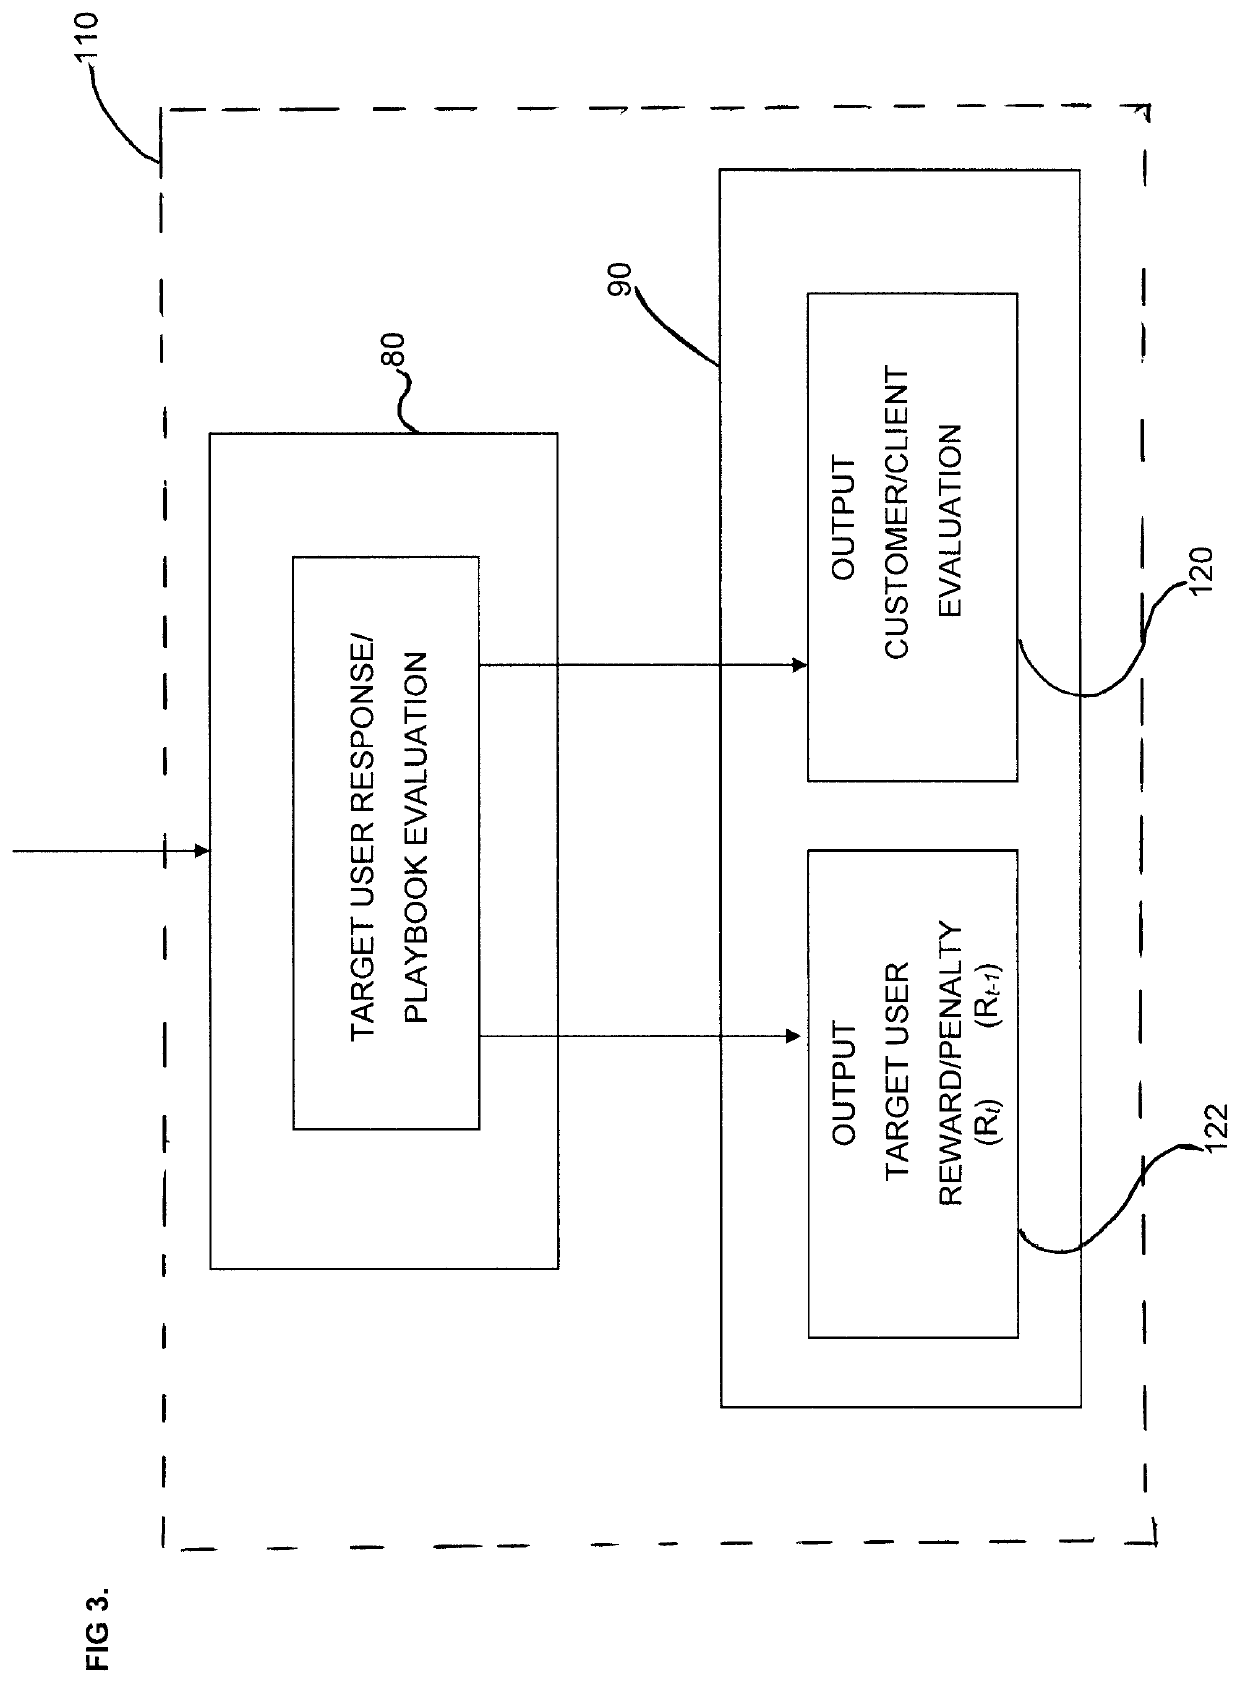 System and Method for Social Engineering Cyber Security Training